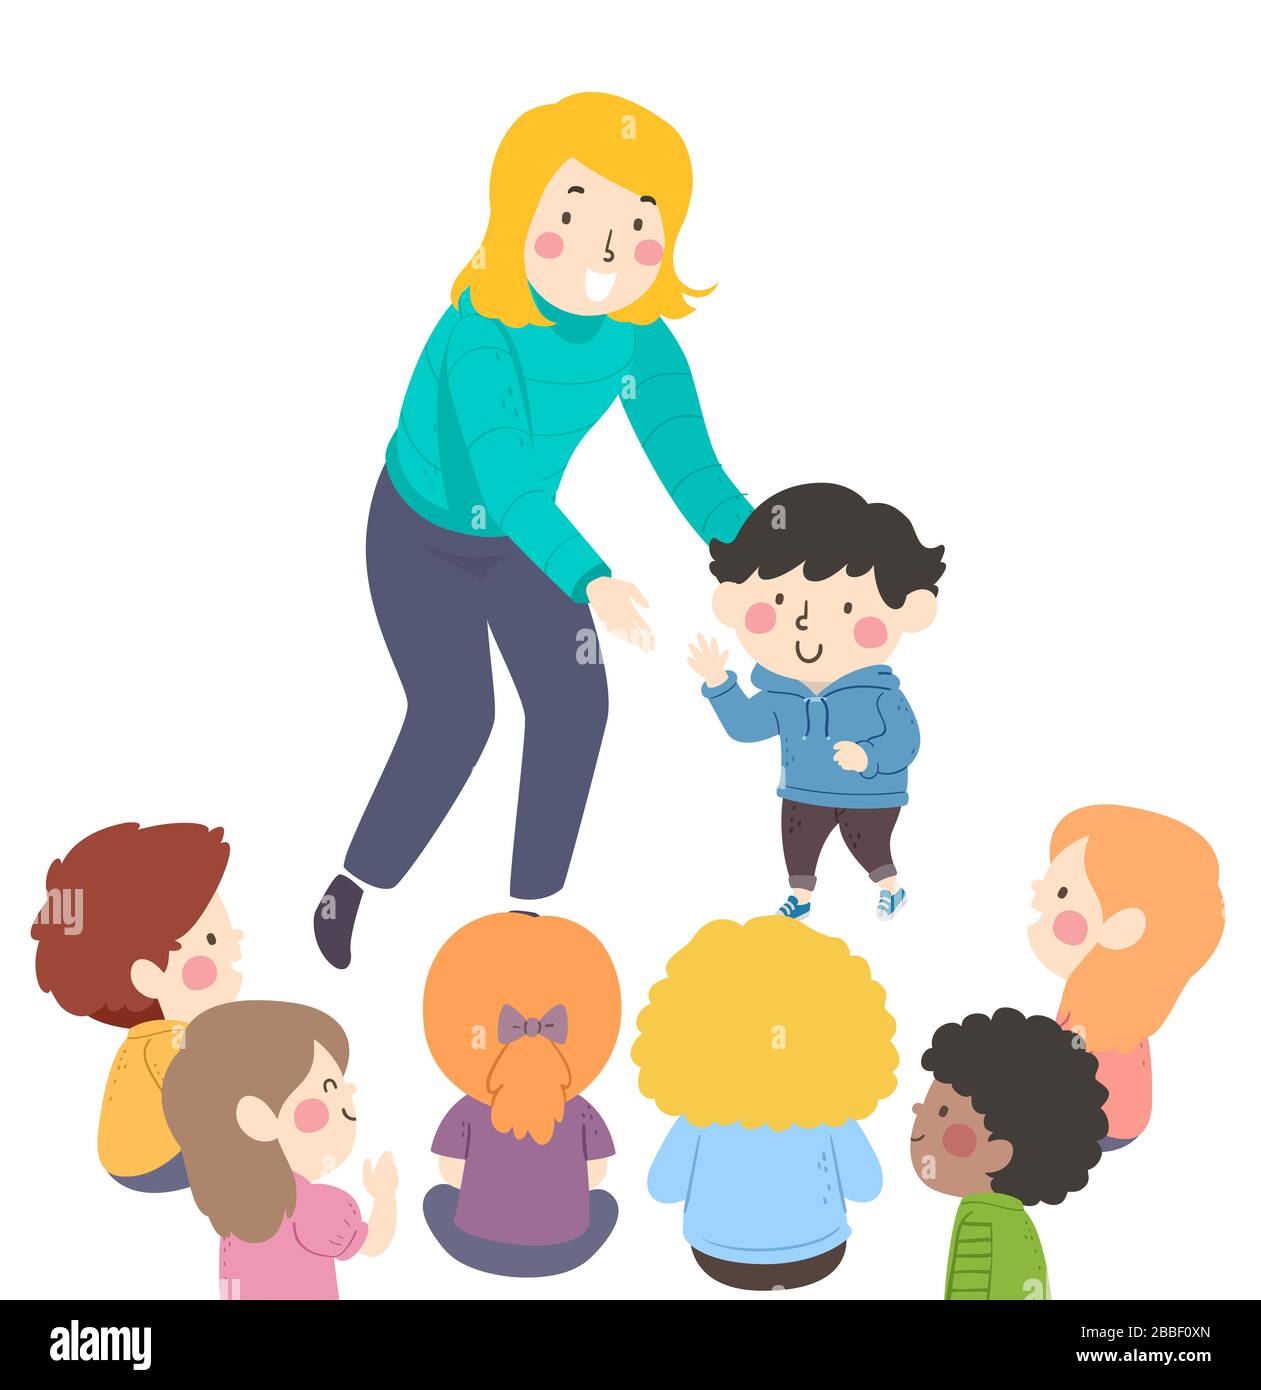 Illustration of a Teacher Girl Introducing a New Student, Kid Boy to the Rest of the Class Stock Photo